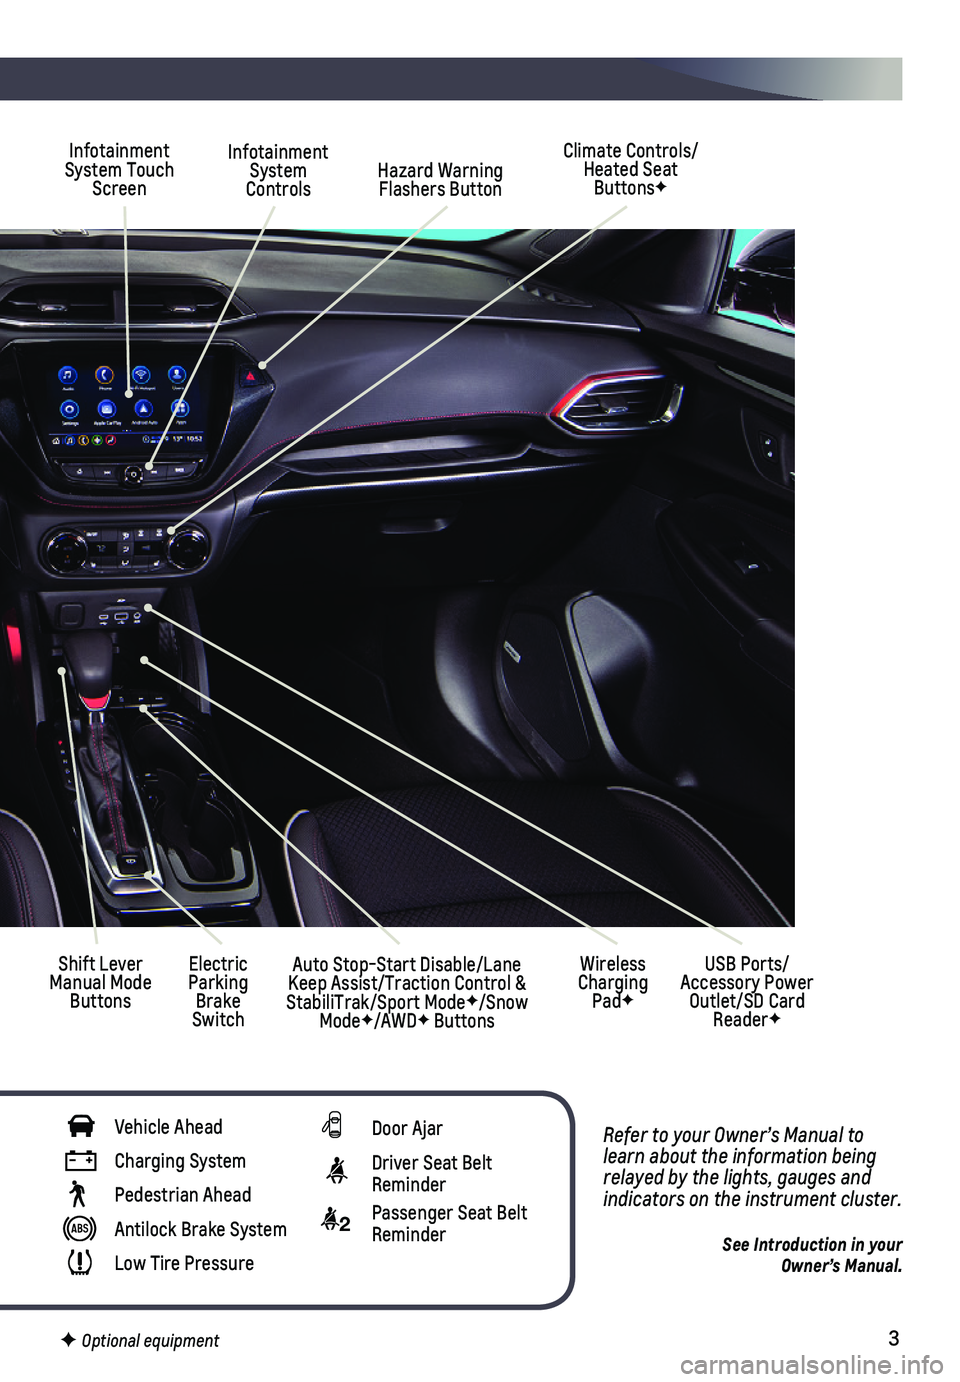 CHEVROLET TRAILBLAZER 2021  Get To Know Guide 3
Refer to your Owner’s Manual to learn about the information being relayed by the lights, gauges and indicators on the instrument cluster.
See Introduction in your  Owner’s Manual.
Infotainment S